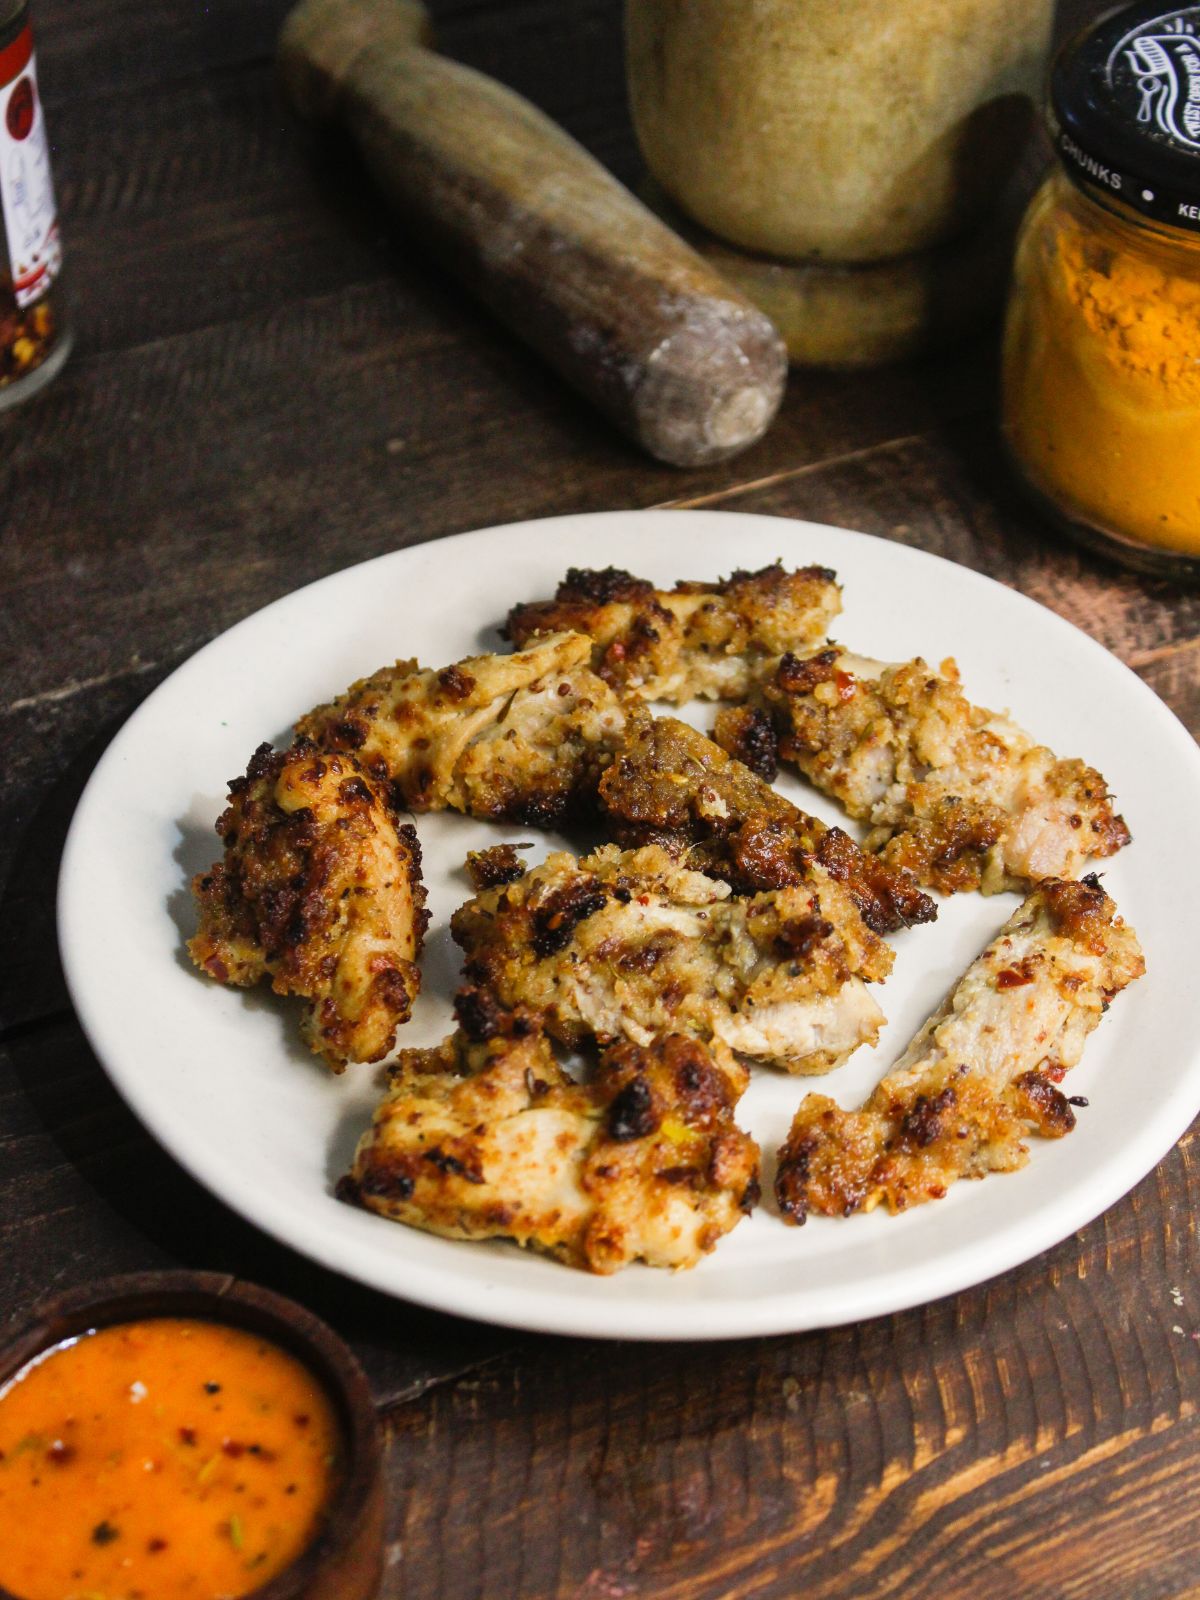 Yummy and spicy Cheesy Chicken Tenders with Chili Mayo Dip